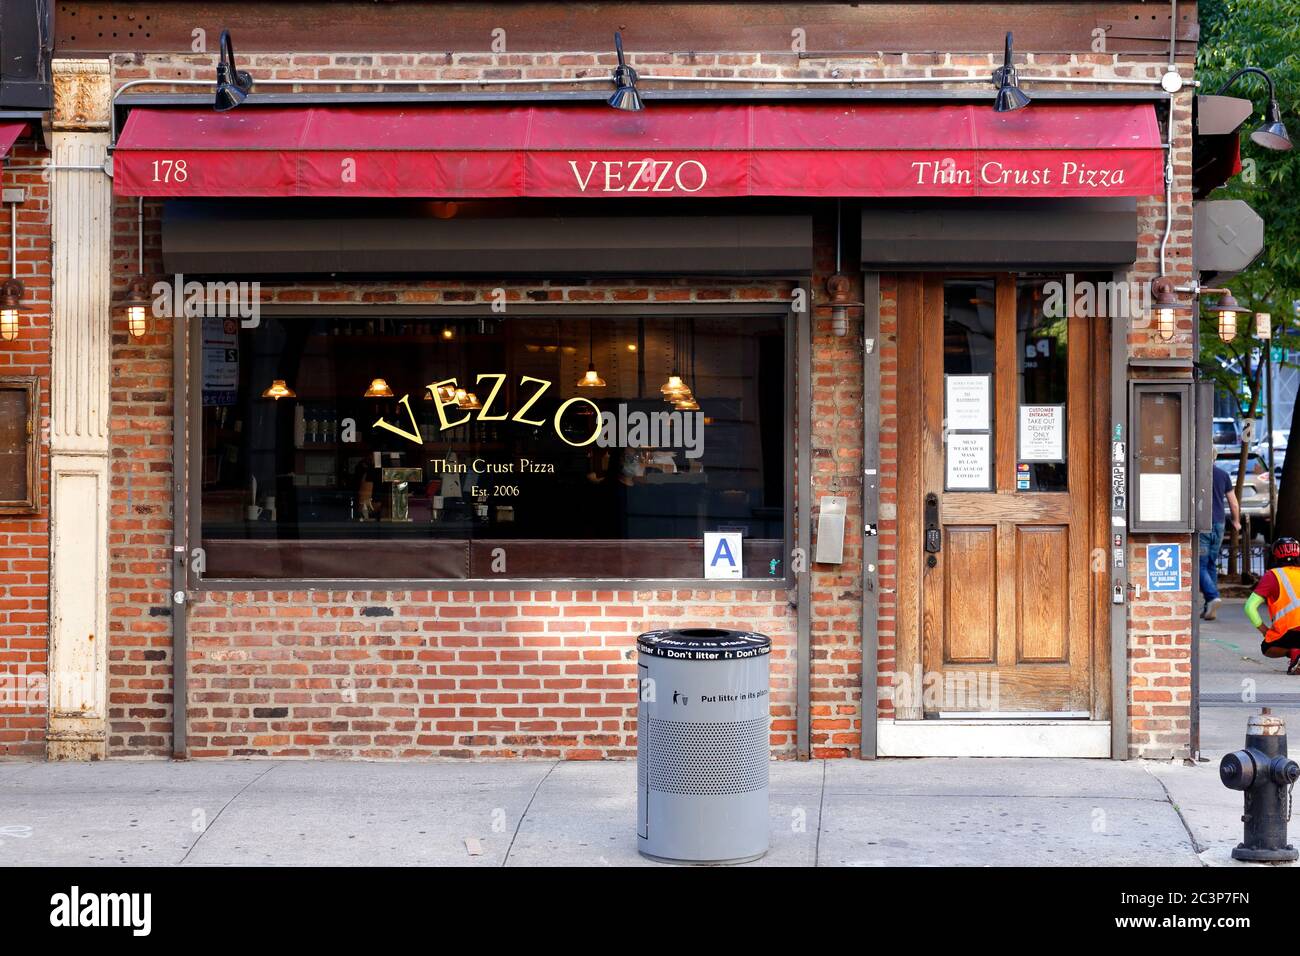 Vezzo Thin Crust Pizza, 178 Lexington Ave, New York, NYC storefront photo of a pizza restaurant in the Murray Hill neighborhood of Manhattan. Stock Photo